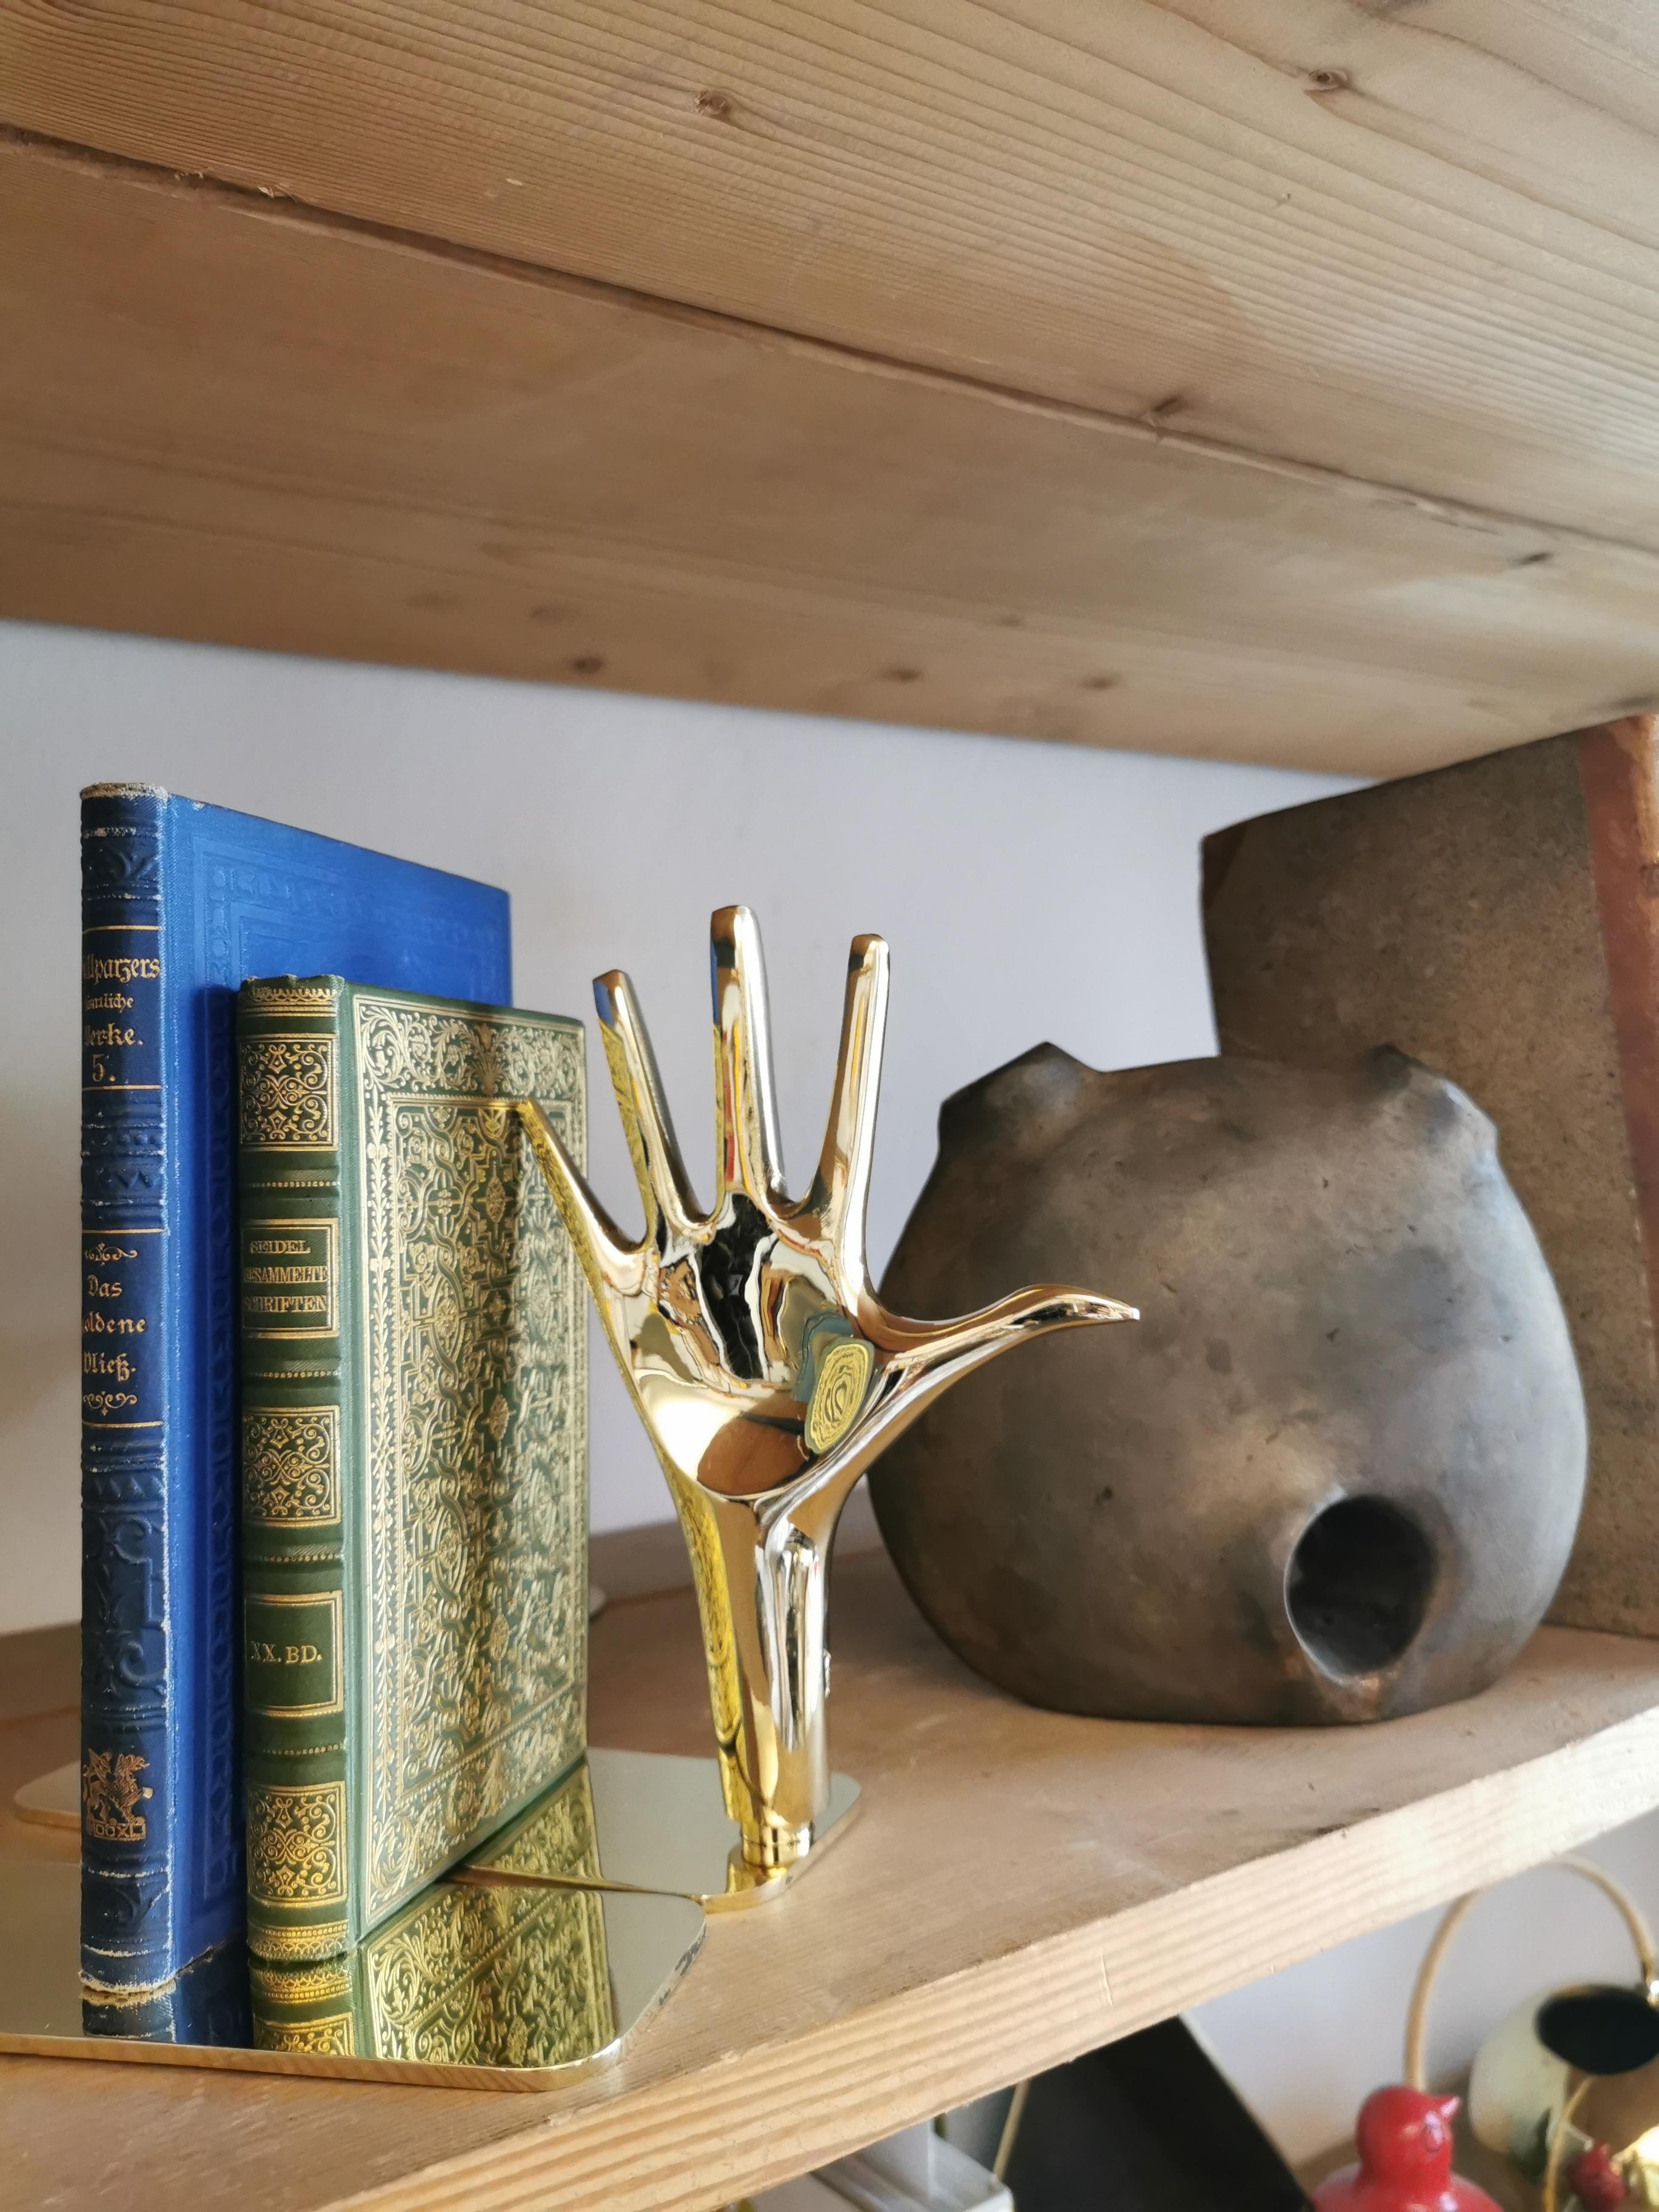 Pair of Large Carl Aubo¨ck Model #4219 'Hands' Brass Bookends. Designed in the 1950s, this incredibly refined and sculptural pair of bookends are executed in polished brass. Hand fully rotates and can be positioned palm outward or inward depending